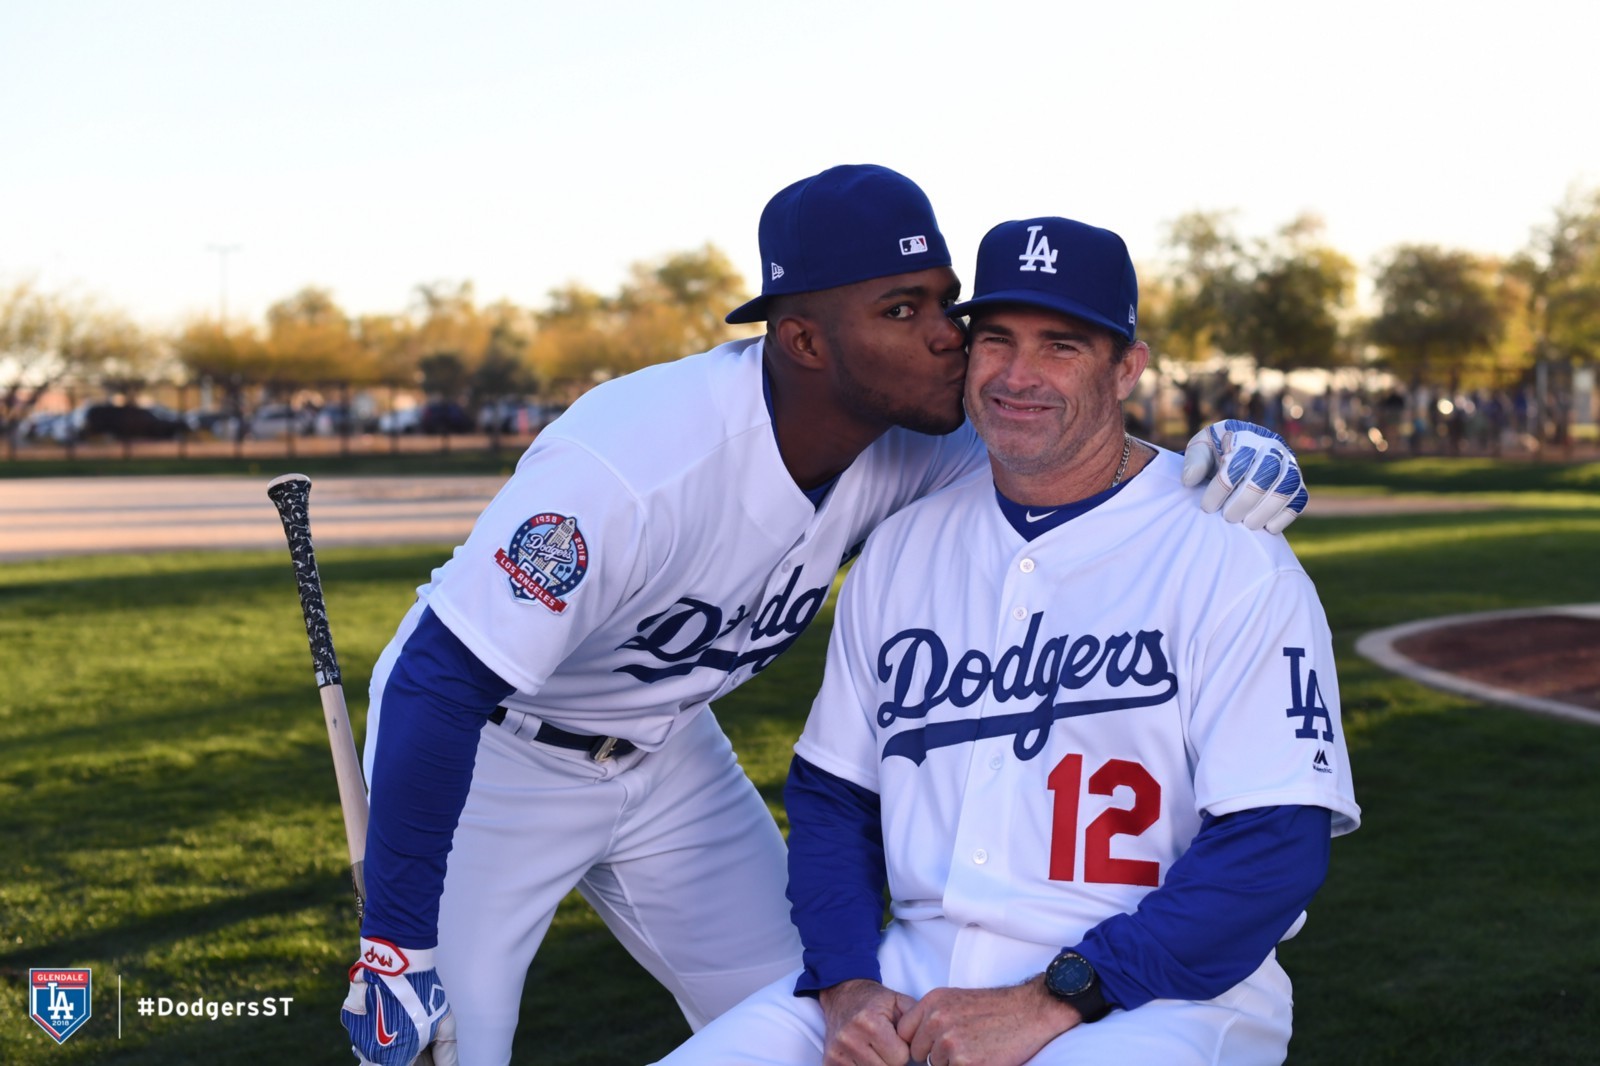 Spring Training for the Dodgers is going as good as expected so far